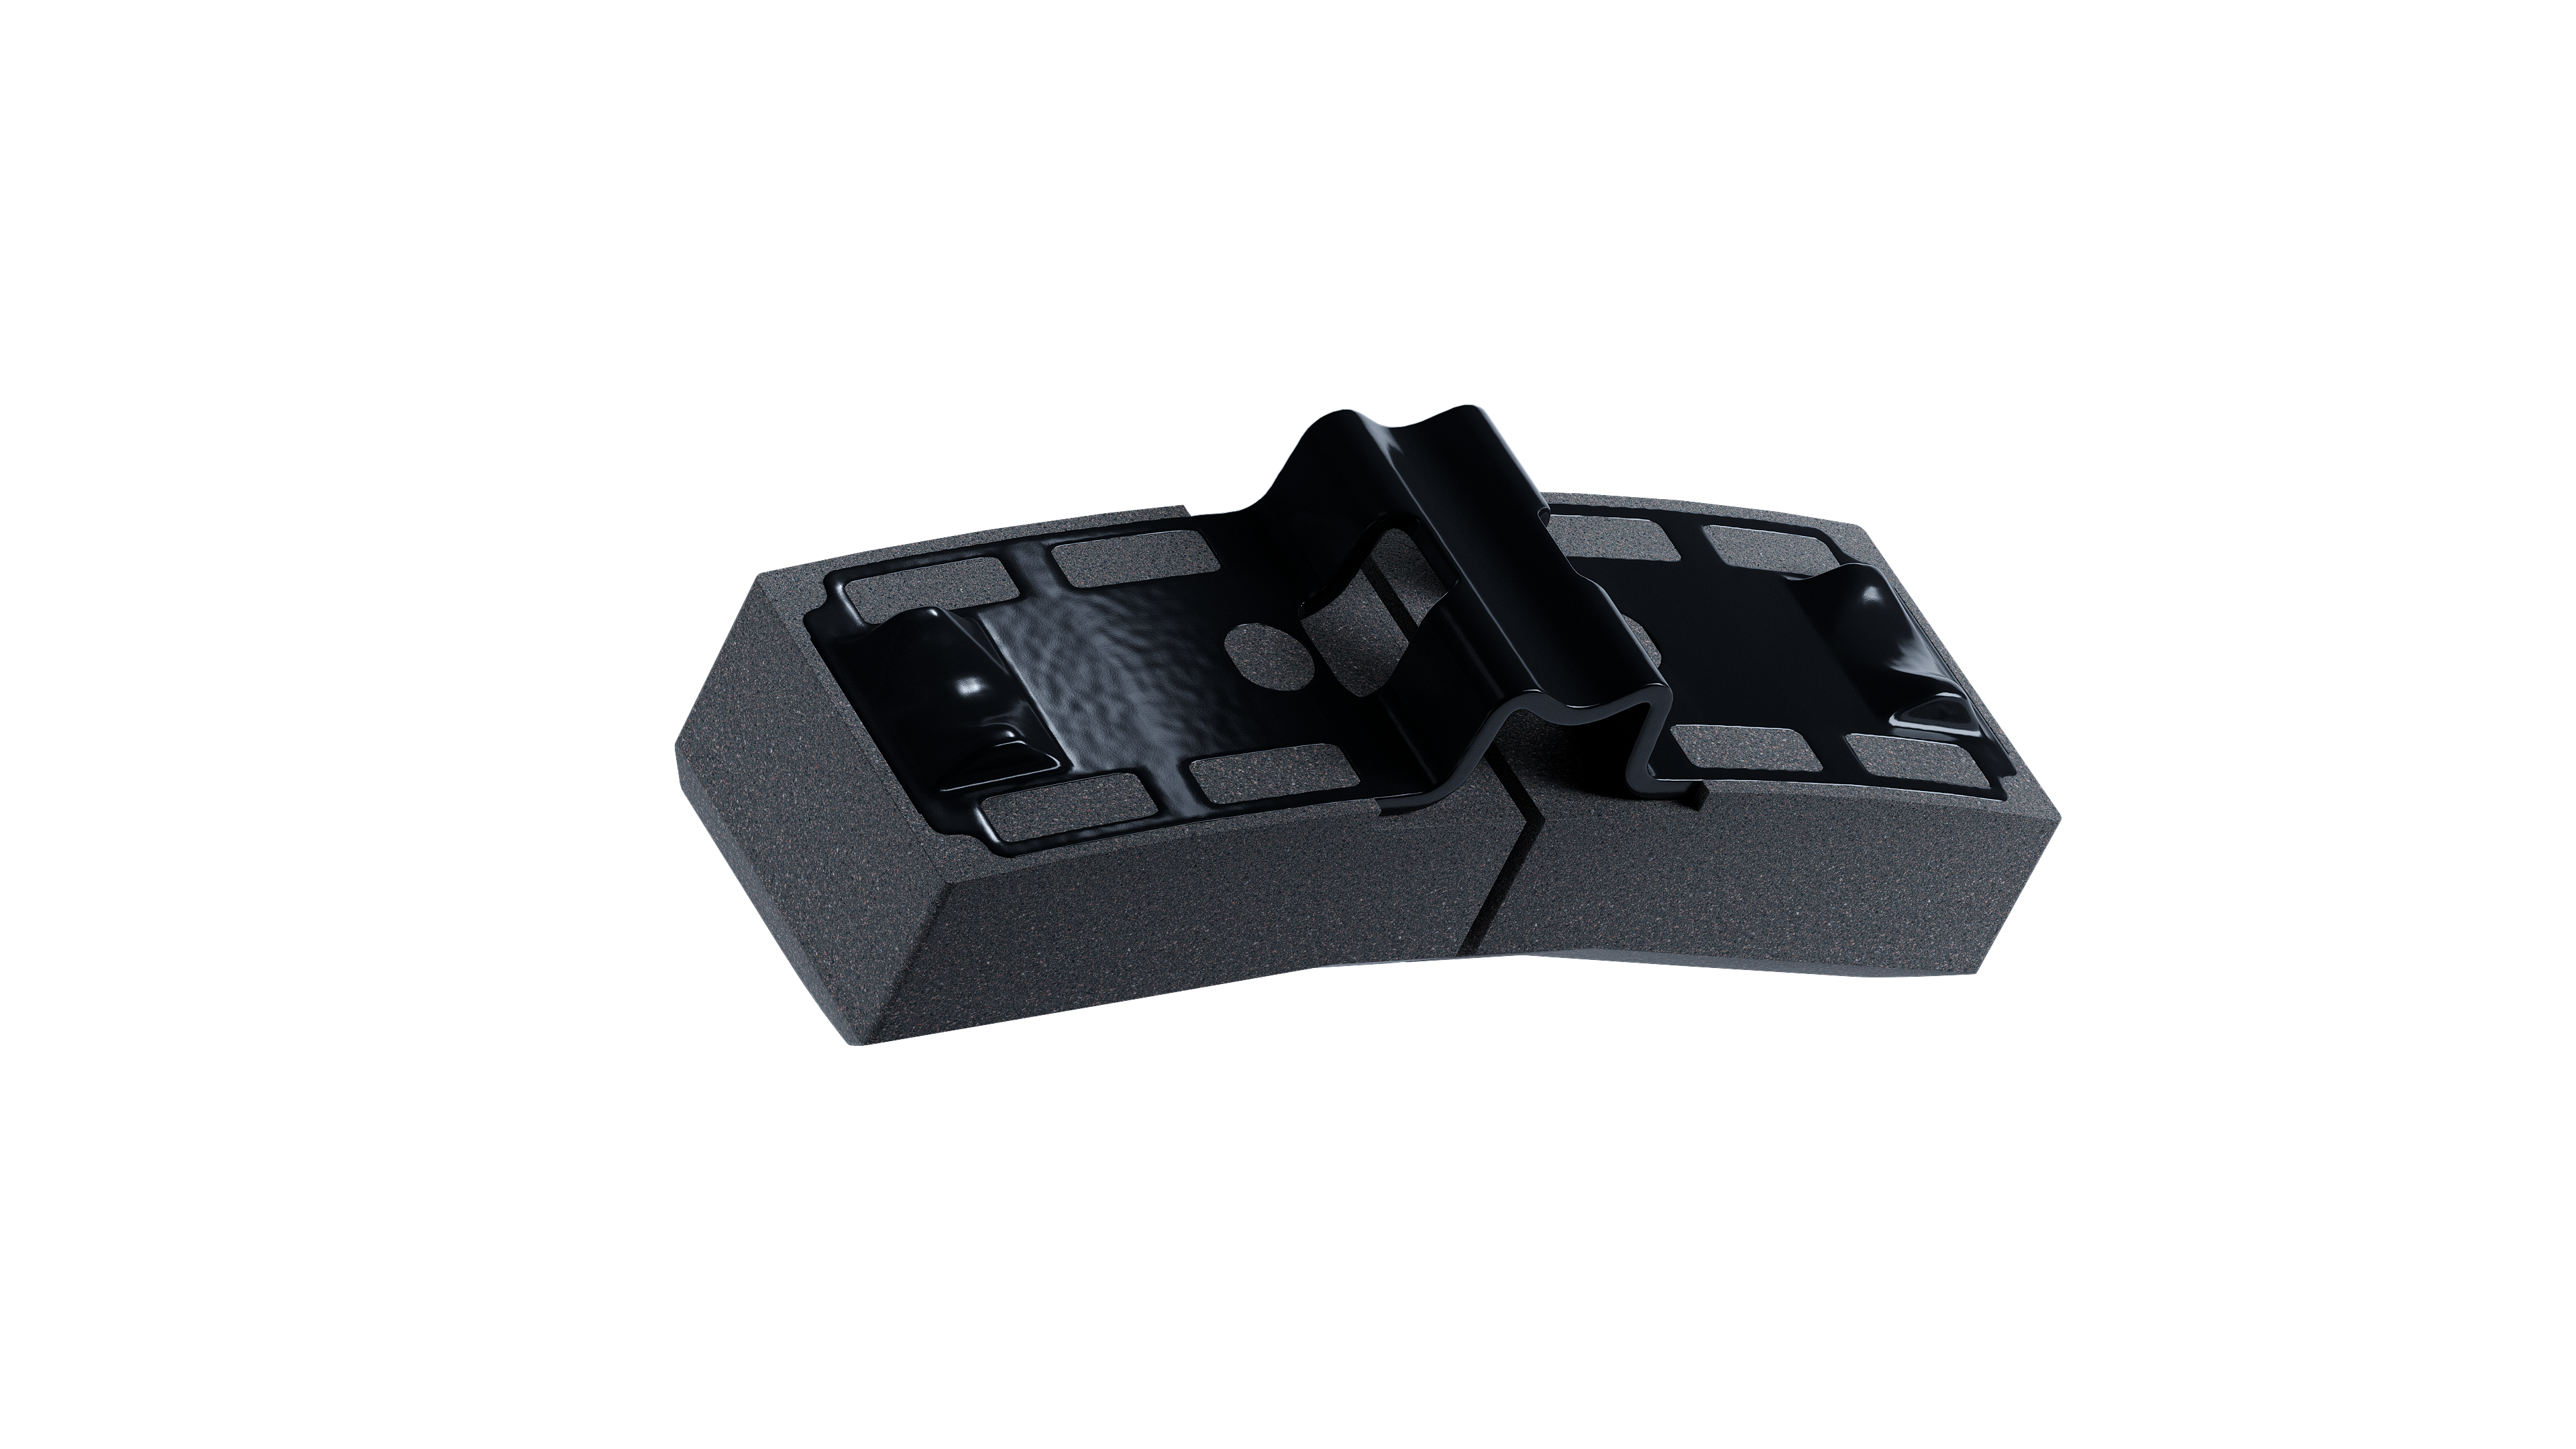 Tenneco´s new Jurid® 847 LL brake block has been specifically developed to meet the increased demand for reduction of noise emission caused by railway traffic. Jurid® 847 uses an optimized contact surface shape, advanced friction material manufacturing techniques, and is expected to sustain the high thermal loads seen on Alpine routes, enabling usage across a broad range of rail tracks. The product formulation was derived from Tenneco’s UIC-certified organic brake block products which are known to improve in-service wheel life. ​ © 2022 Tenneco Inc.